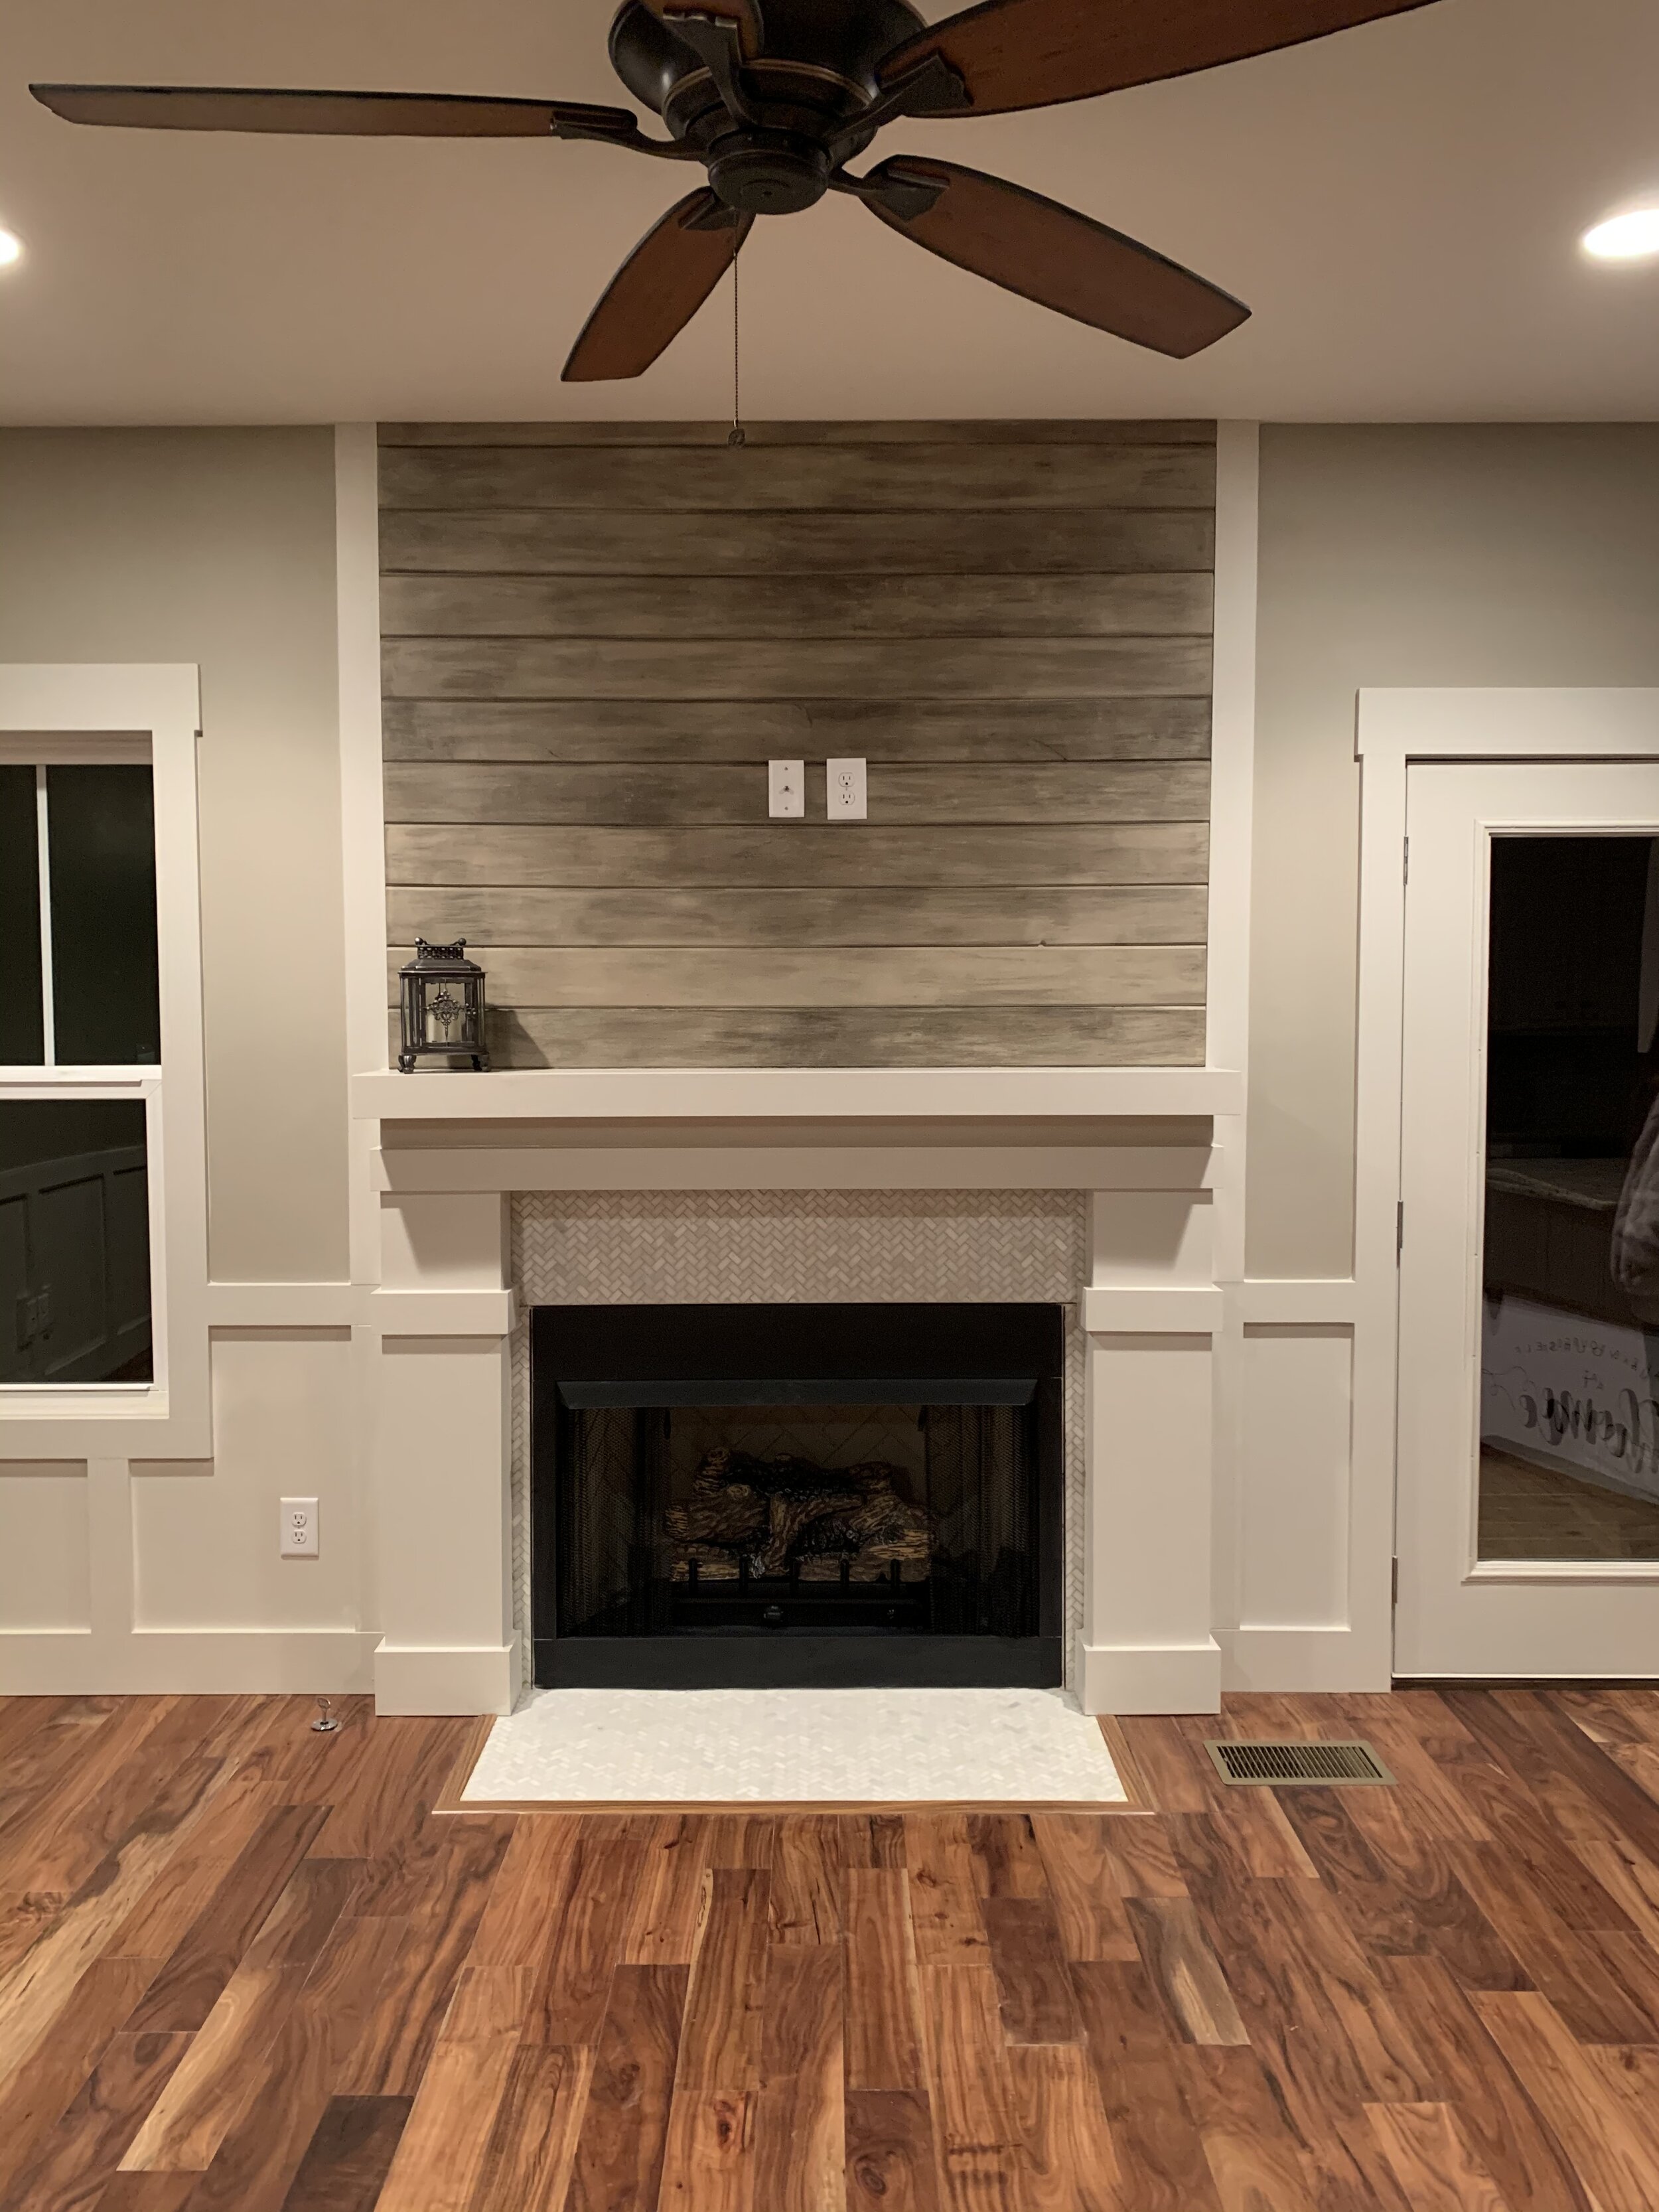 TG-VG-WALL-David Maasen-Fireplace Wall-Stained_Painted.JPG